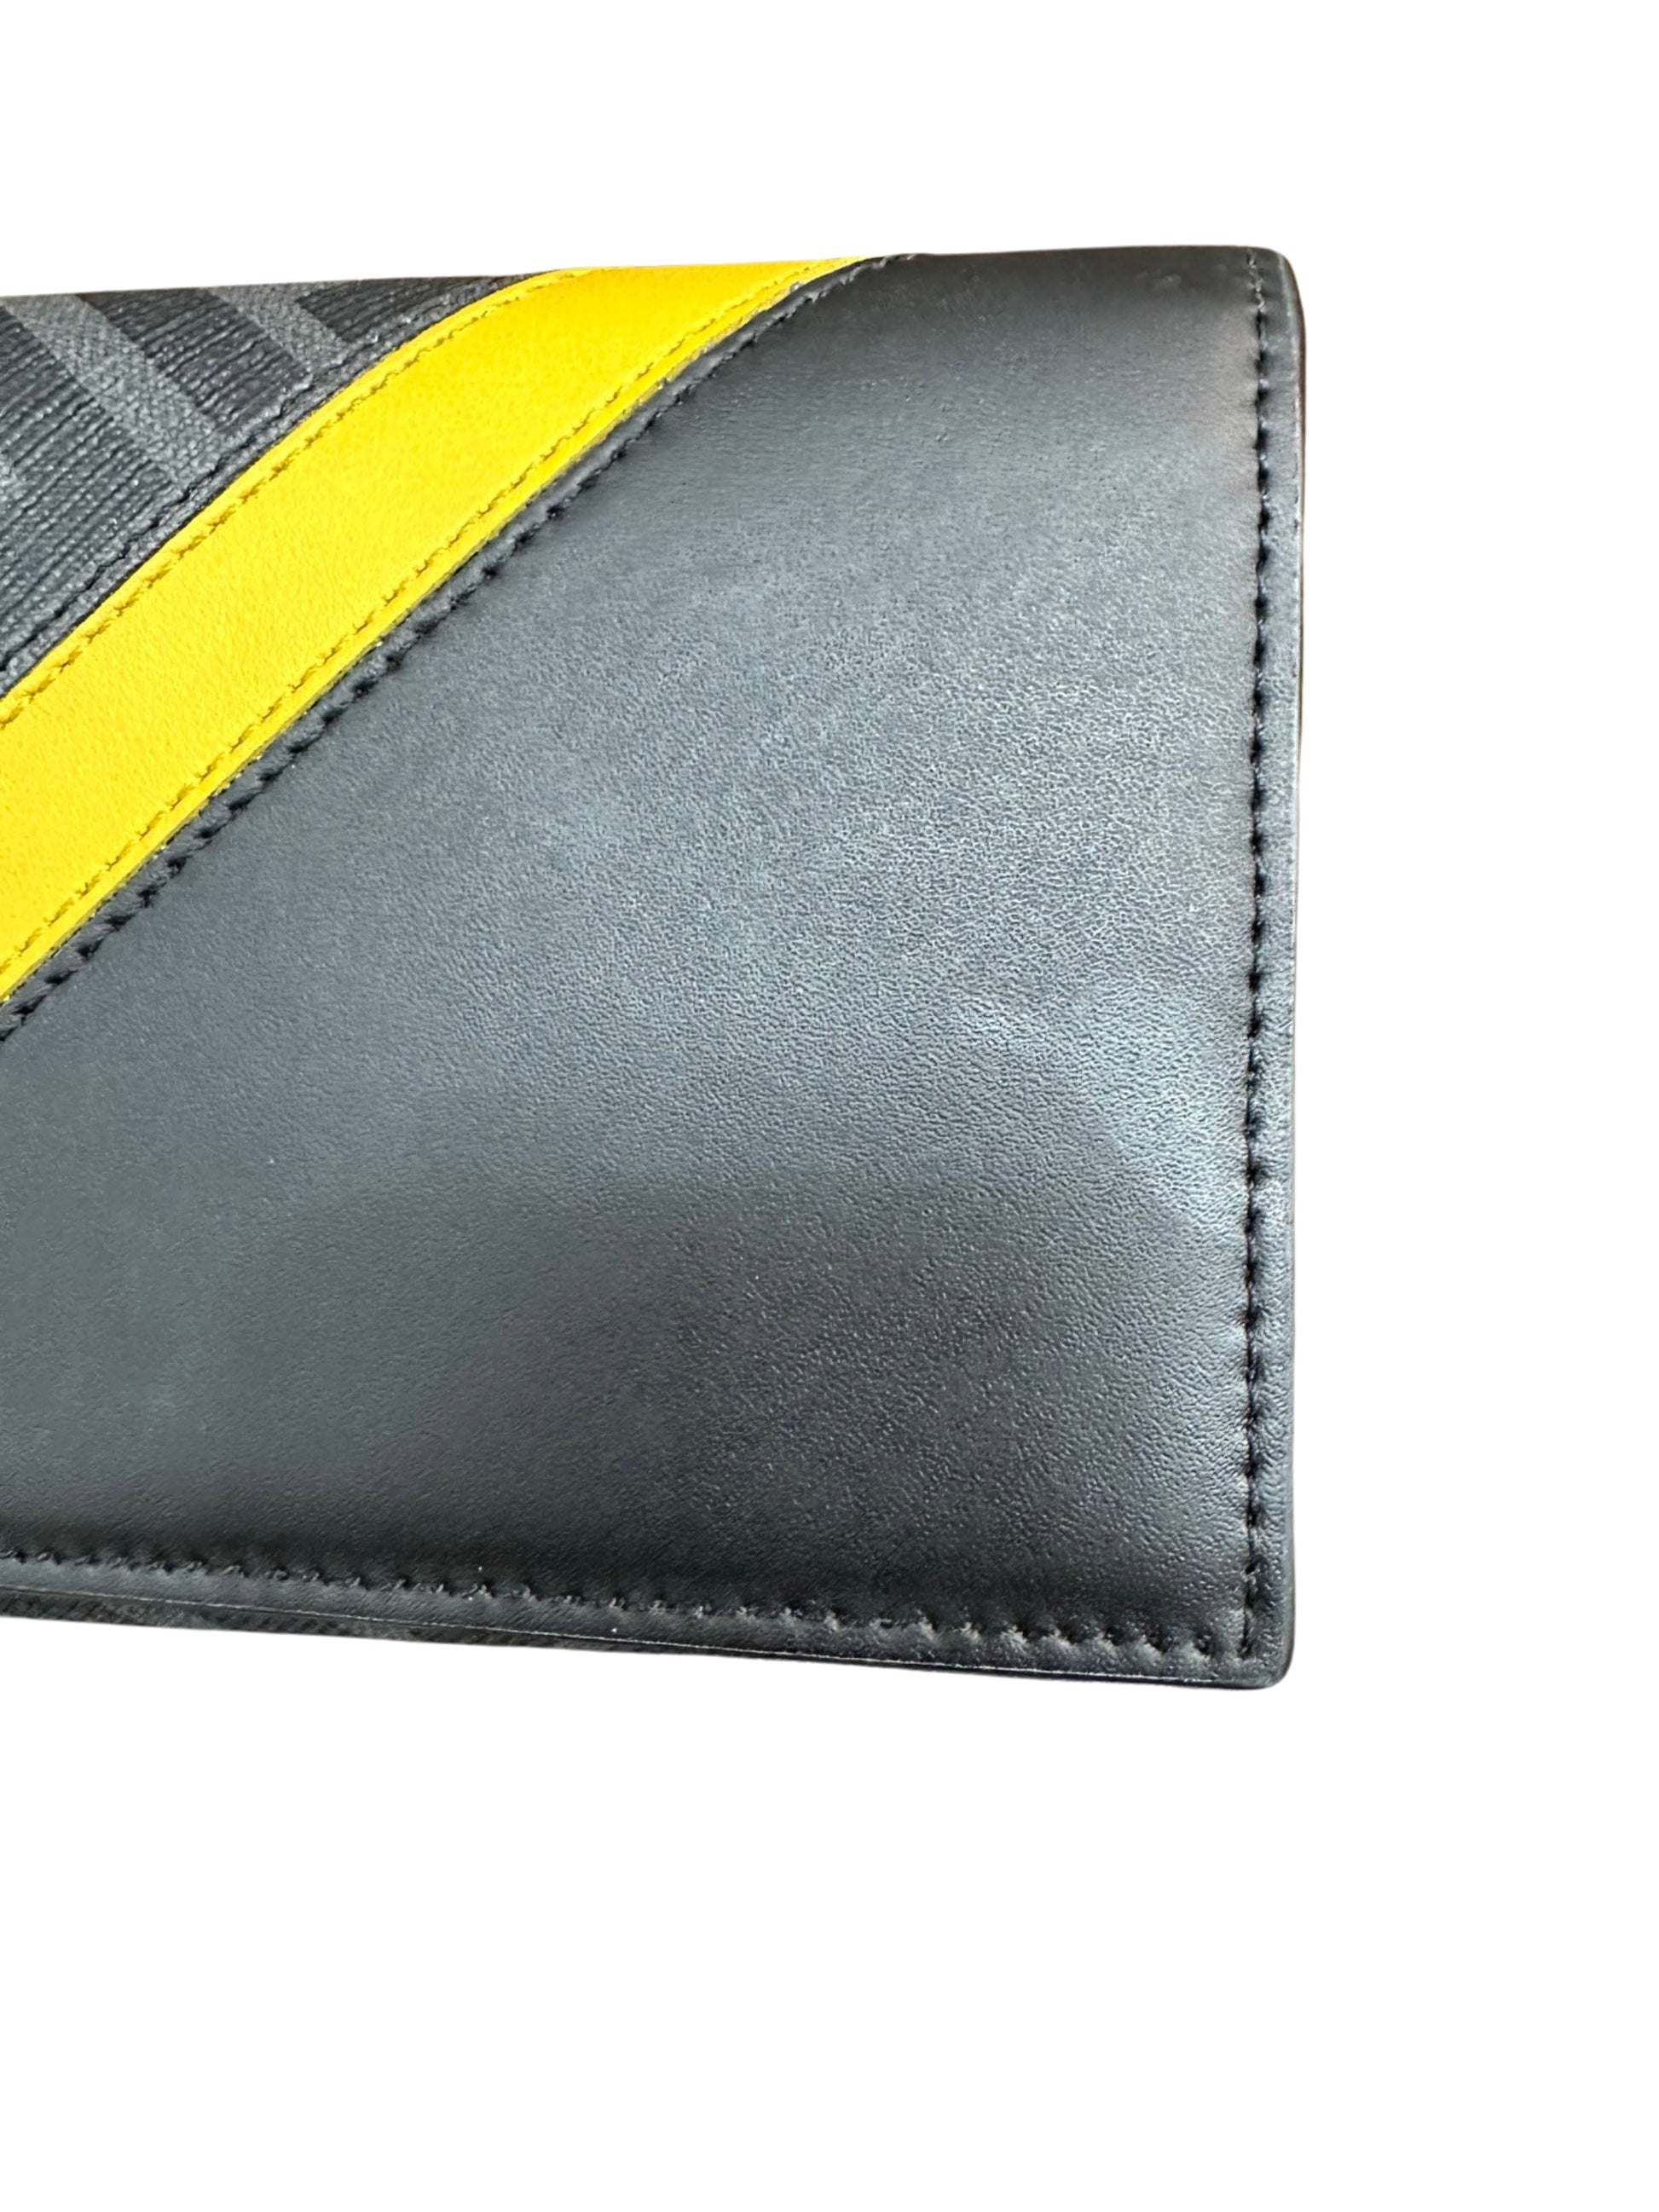 Small mark on front side of wallet